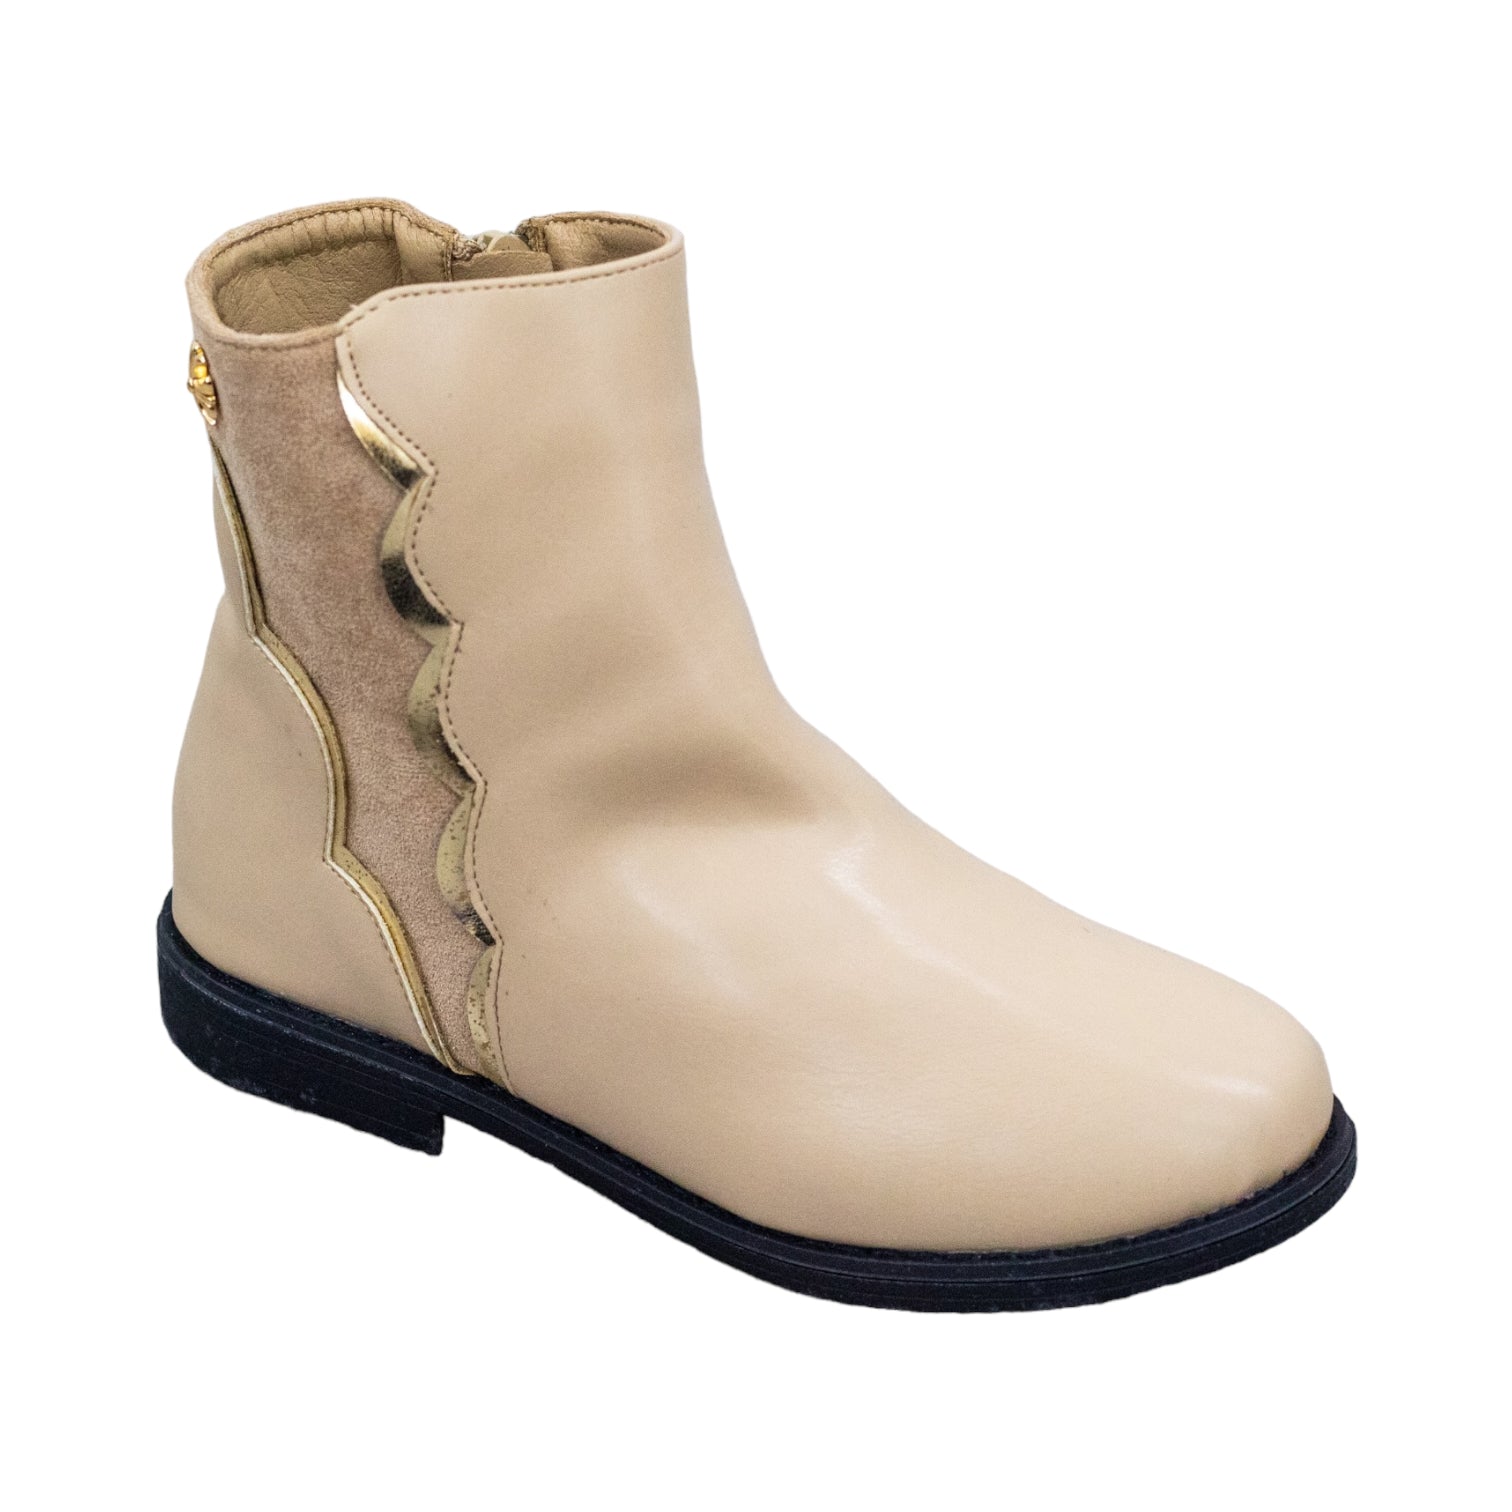 Yesenia girls ankle boot with side detailed beige